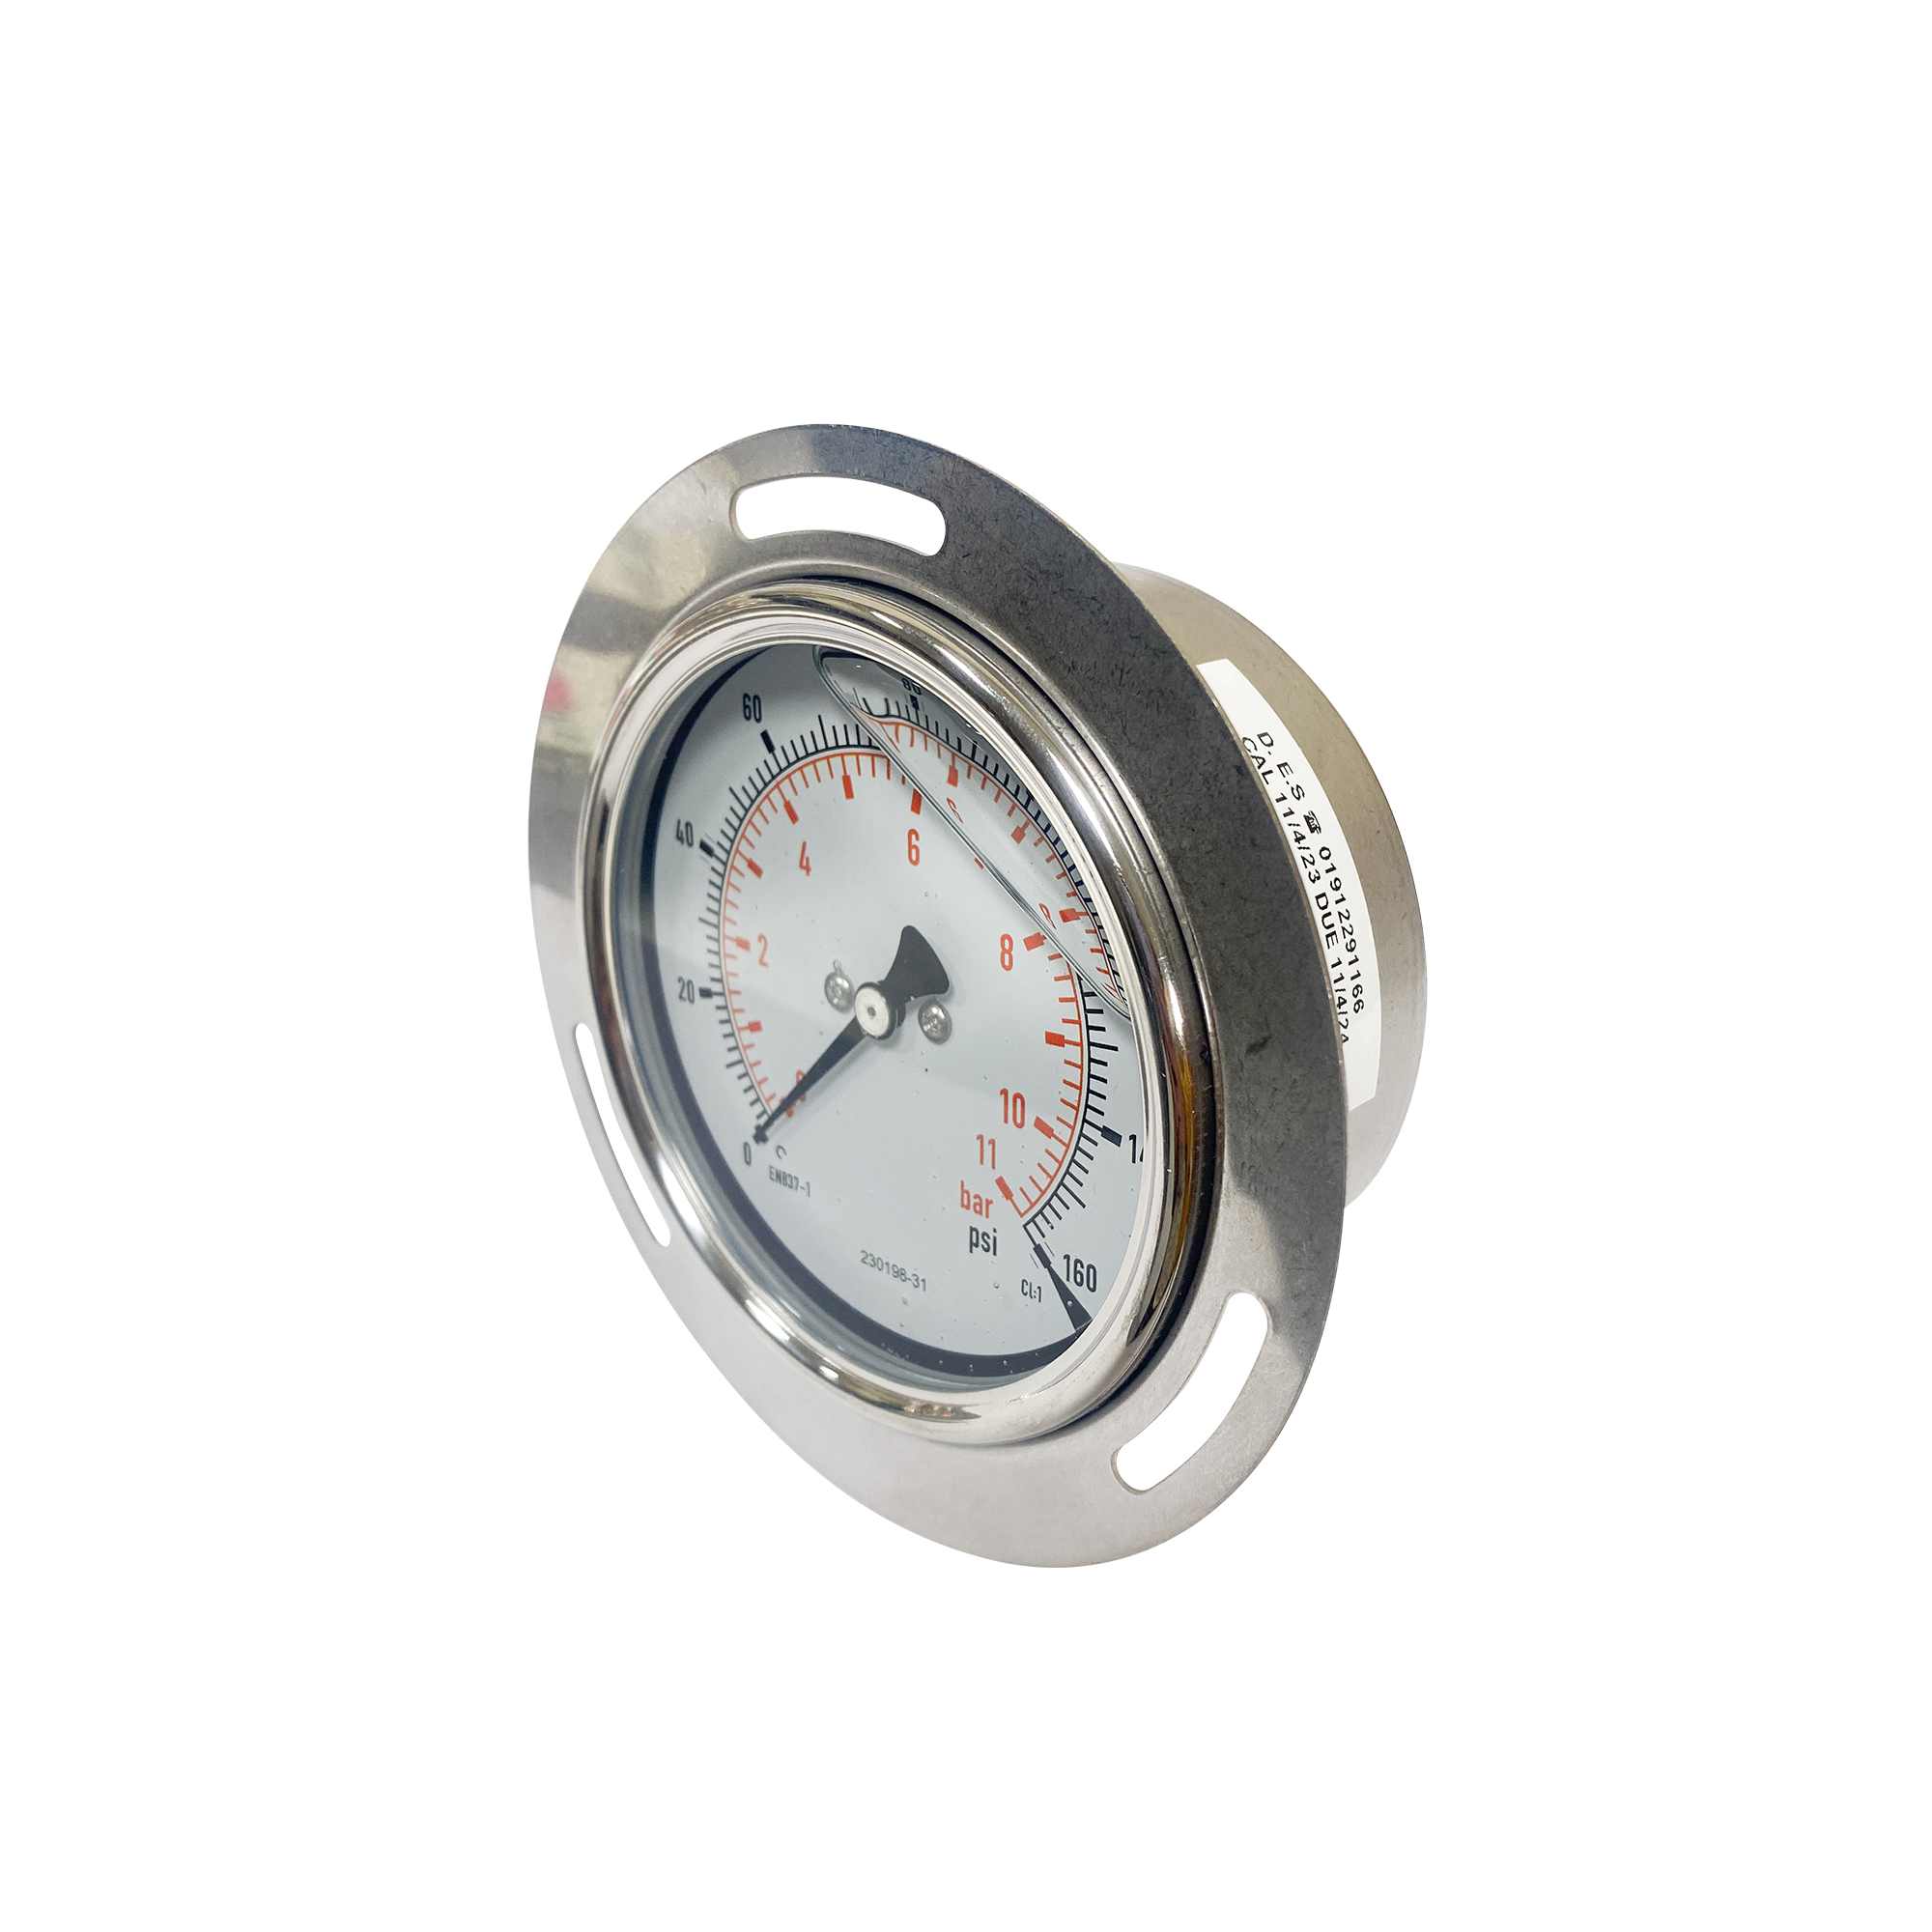 Gauge – Pressure – 0-11bar Dual Marks 0-160psi – Non-Oxy